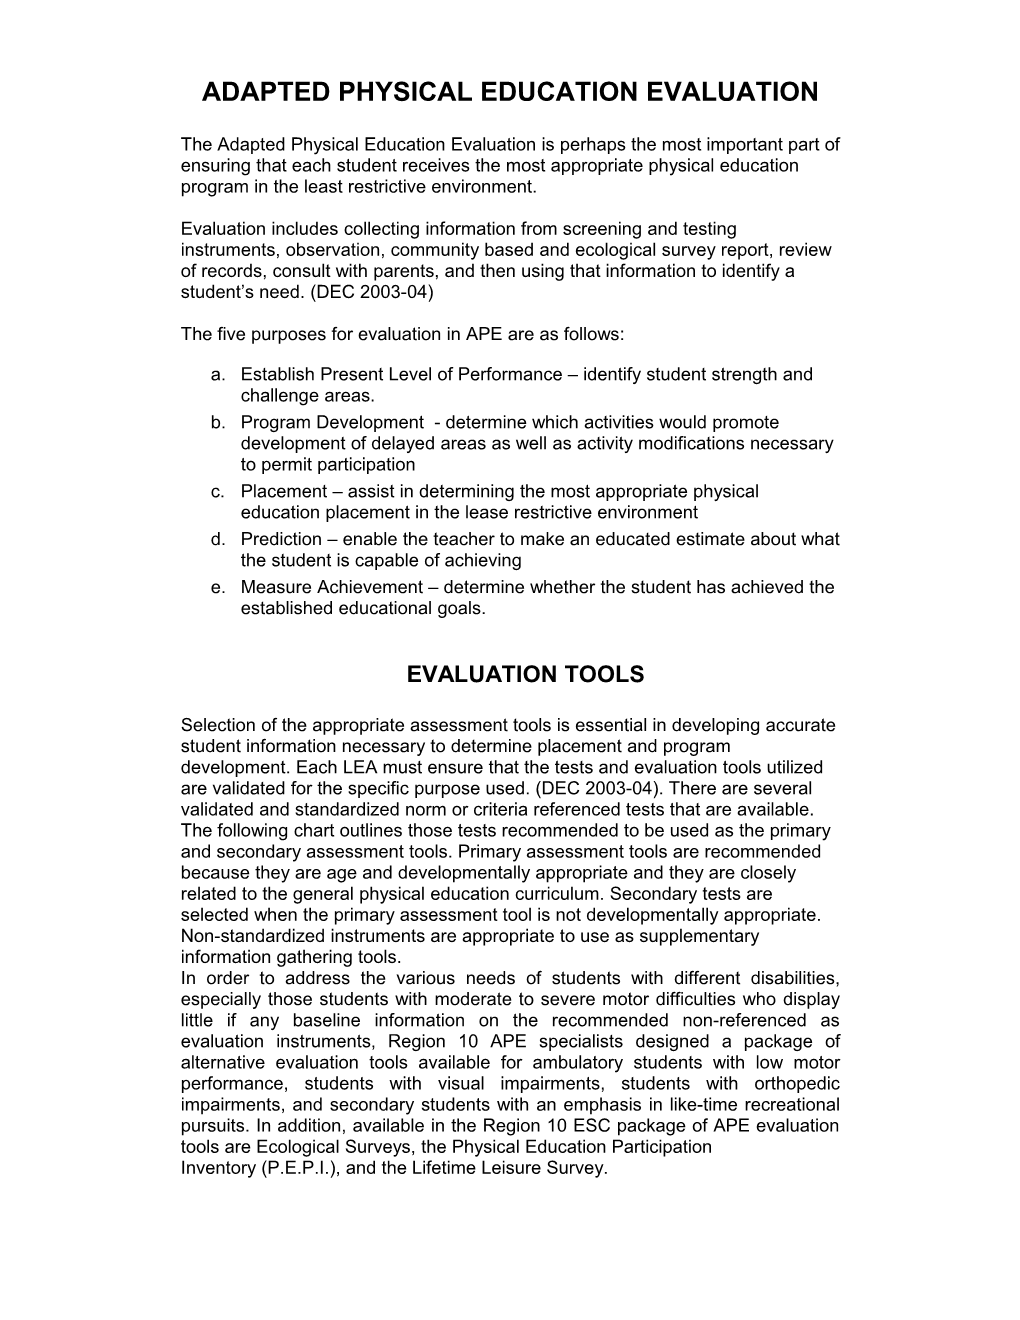 Adapted Physical Education Evaluation